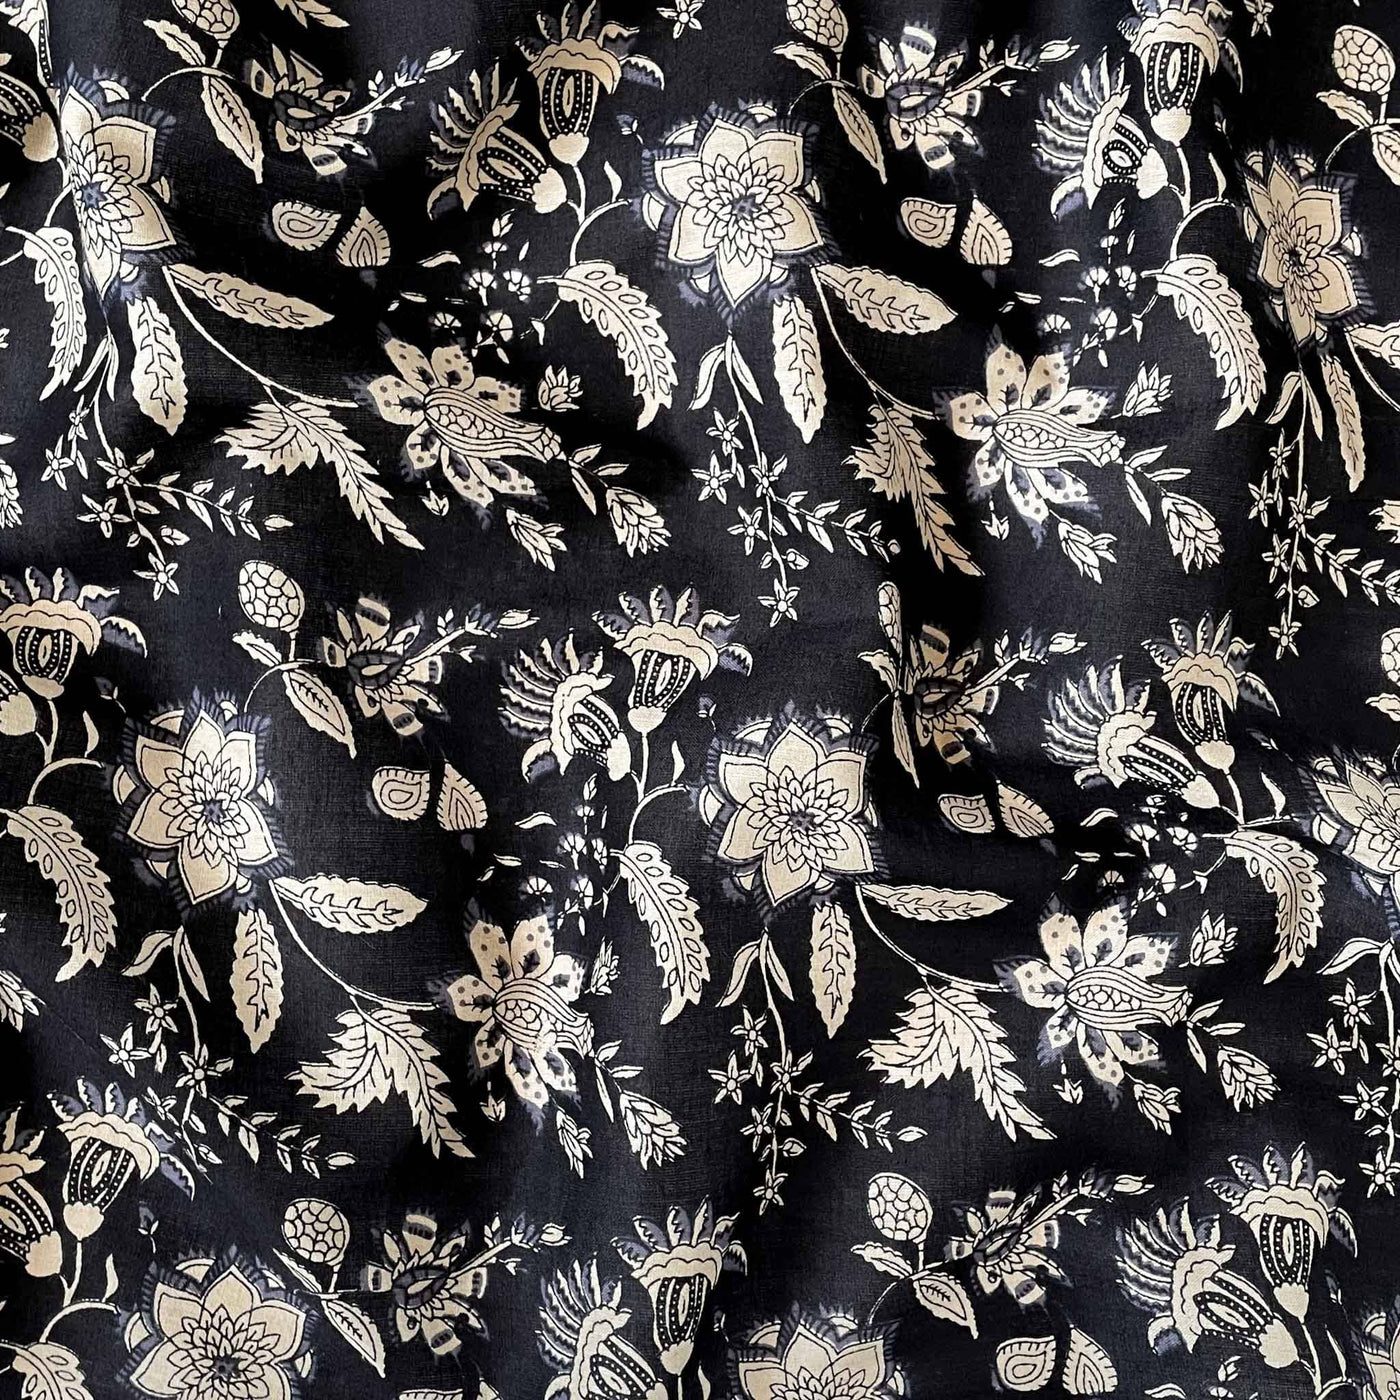 Fabric Pandit Fabric Black & Cream Egyptian Floral Hand Block Printed Pure Cotton Fabric (Width 43 inches)